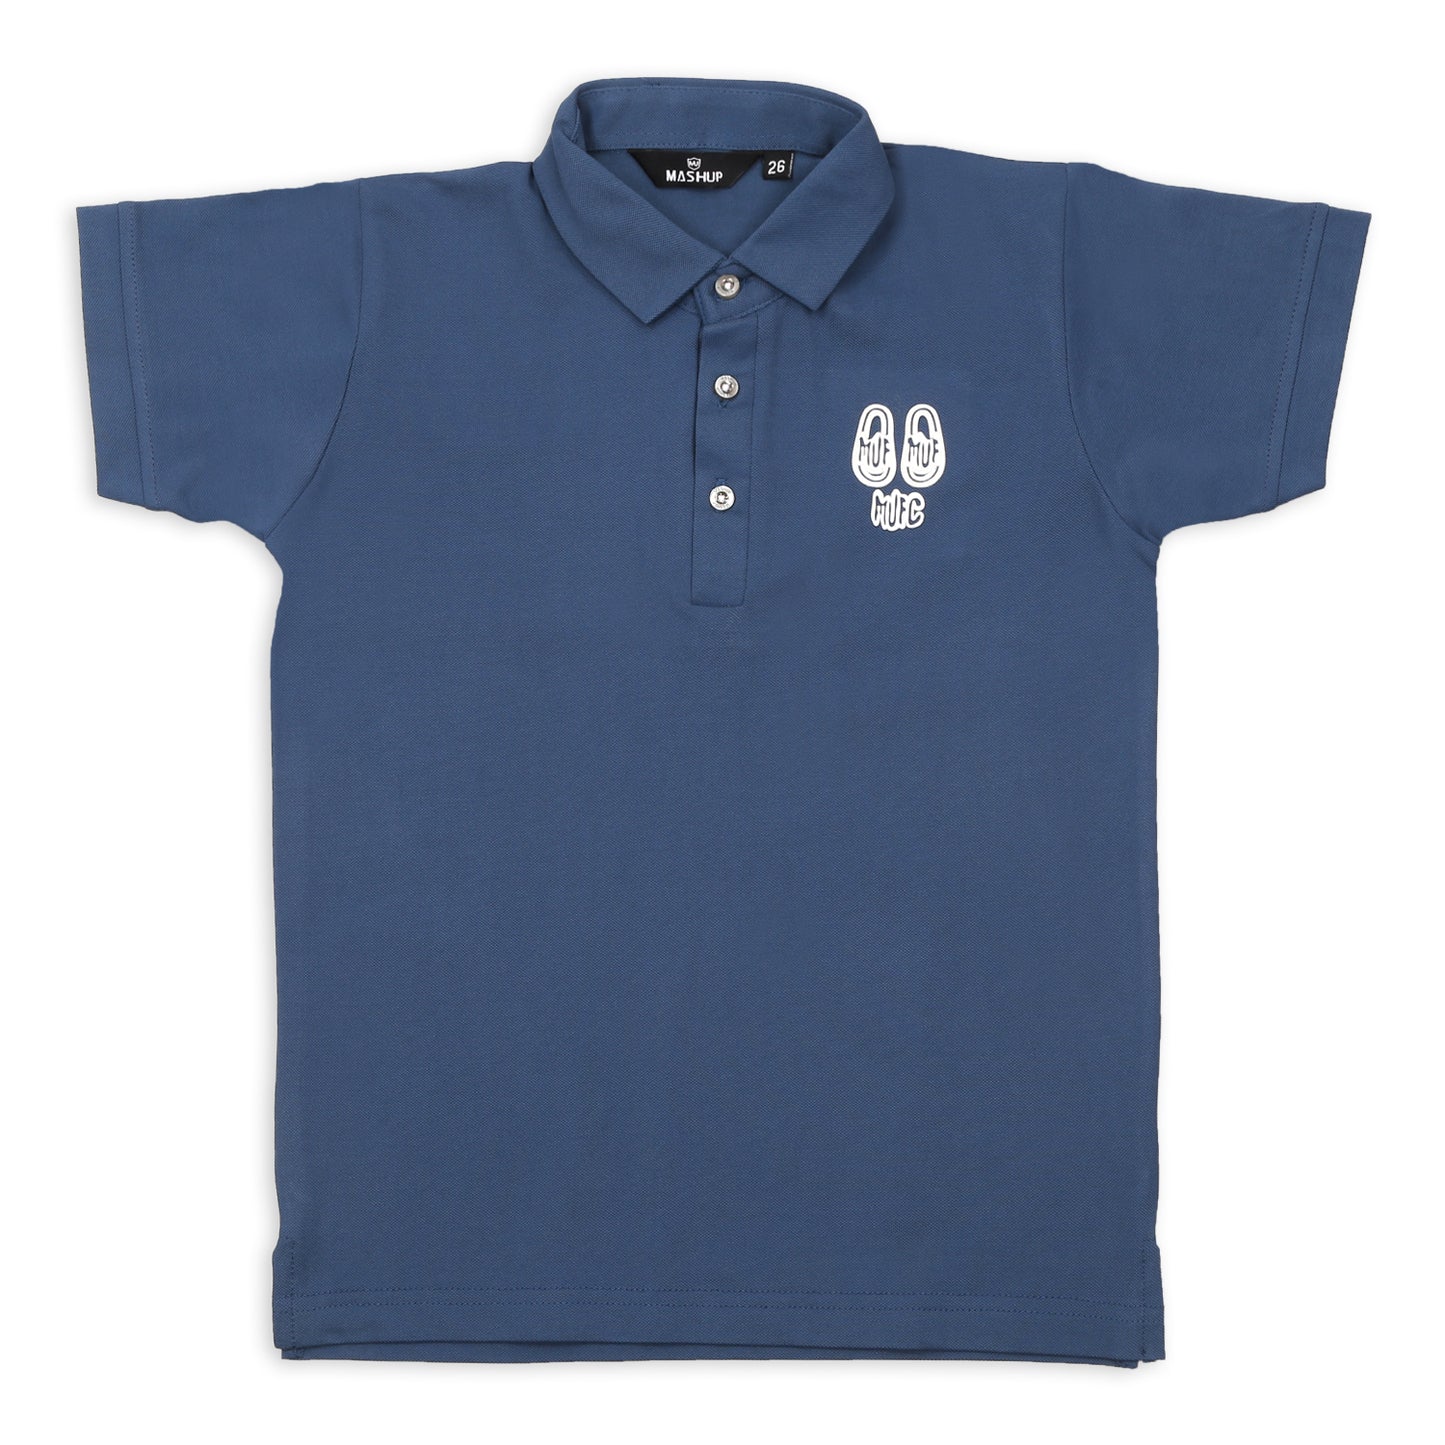 Unleash the Cool: Boys' Polo T-Shirt for Effortless Style!